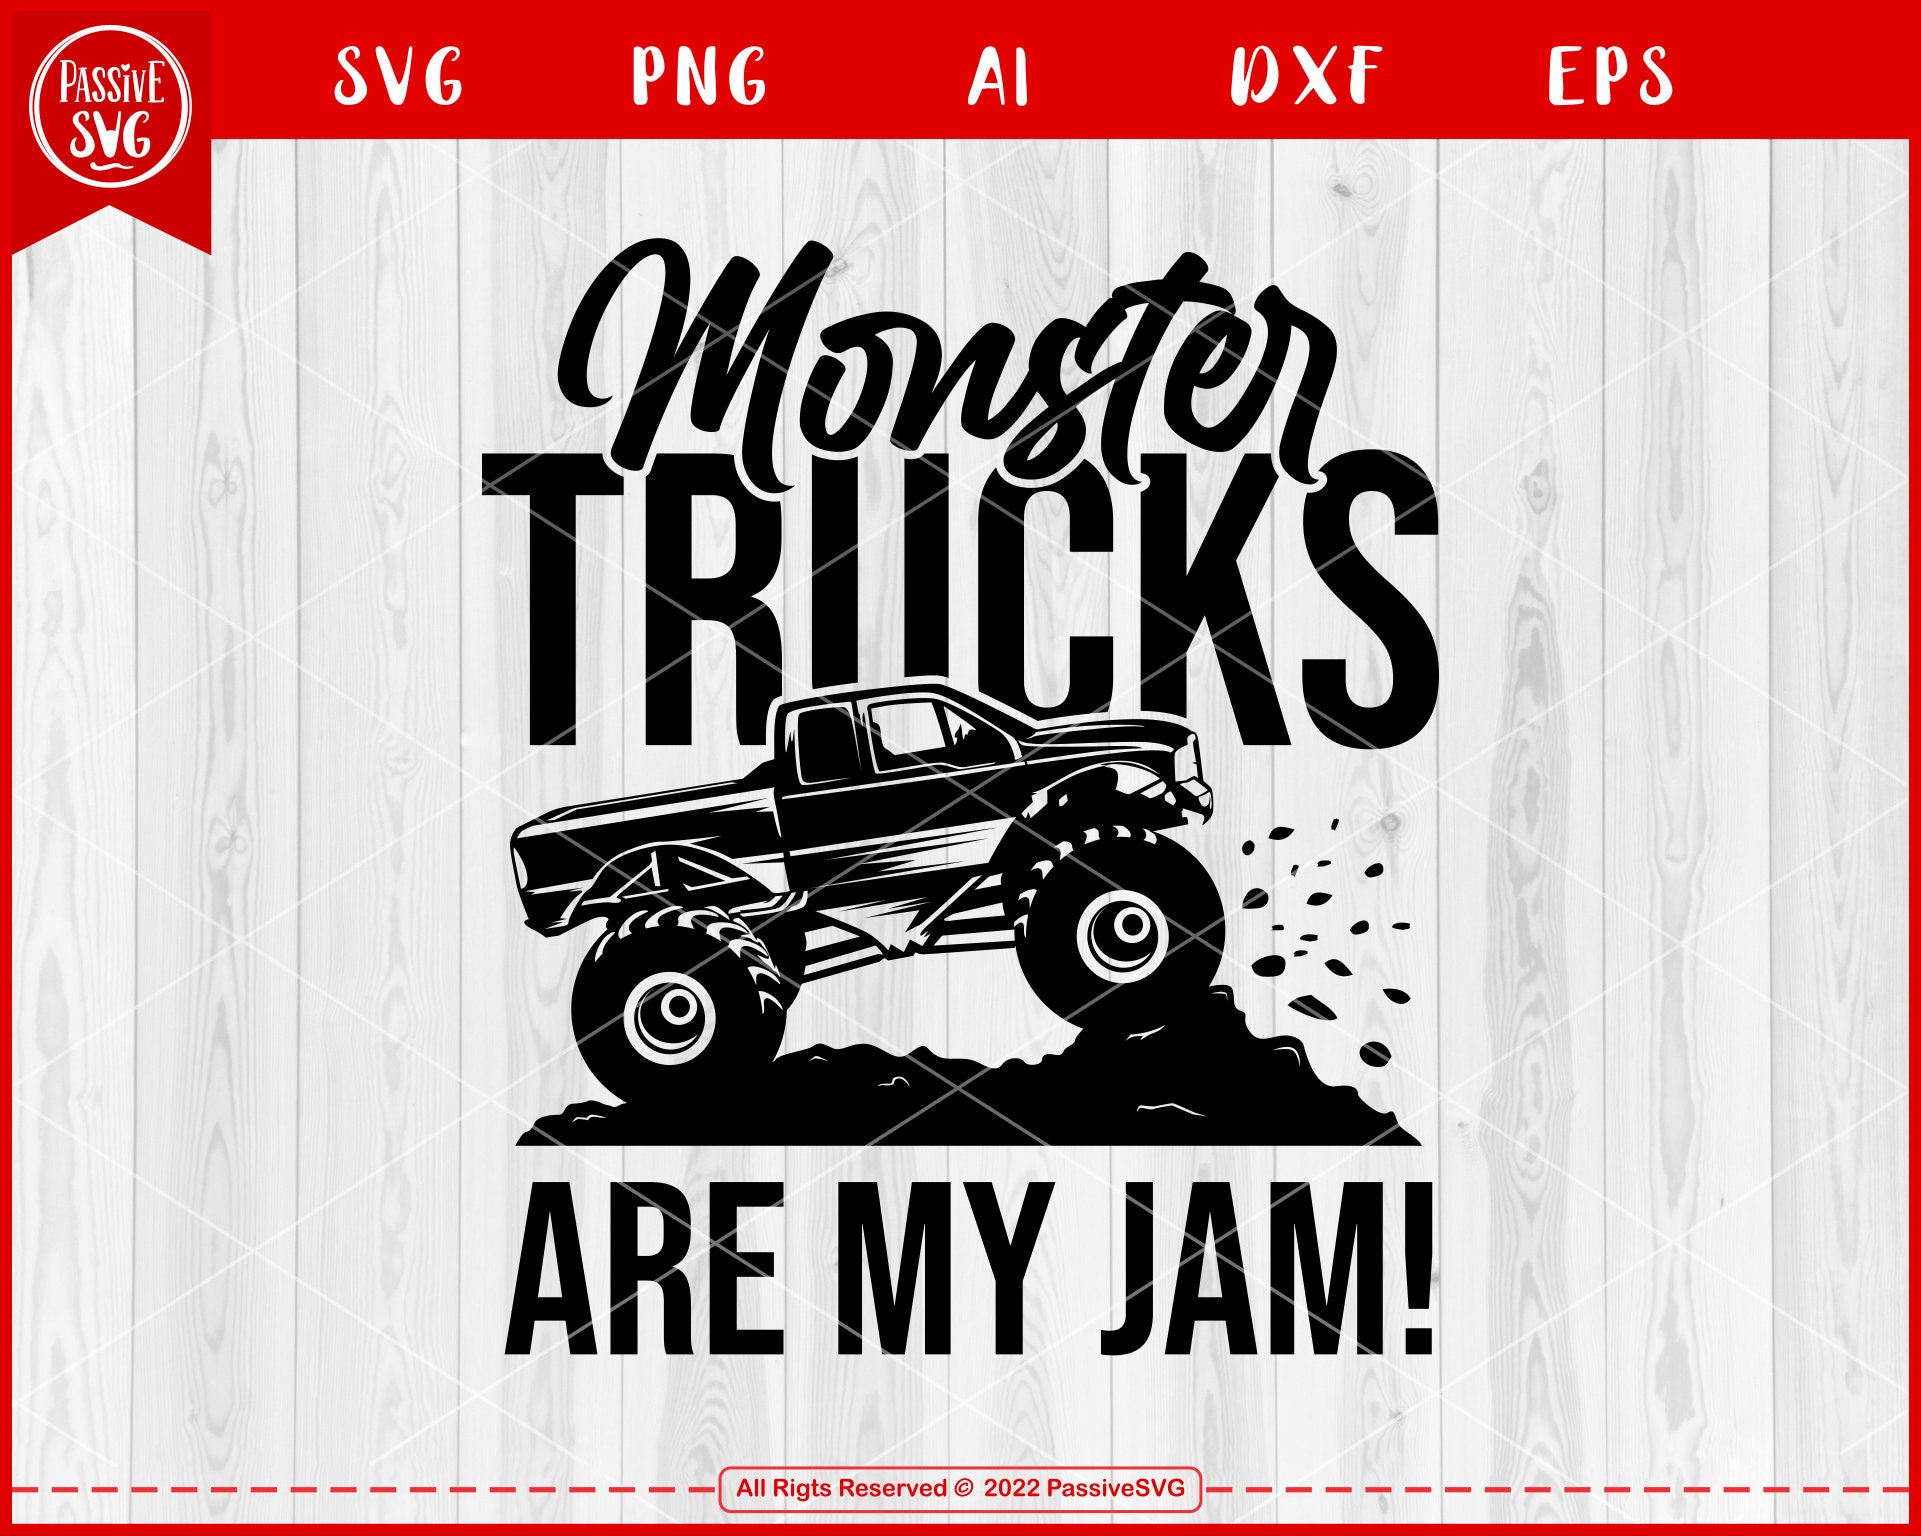 Monster Jam Truck On Fire Coloring Pages : Color Luna  Monster truck  coloring pages, Cars coloring pages, Halloween coloring pages